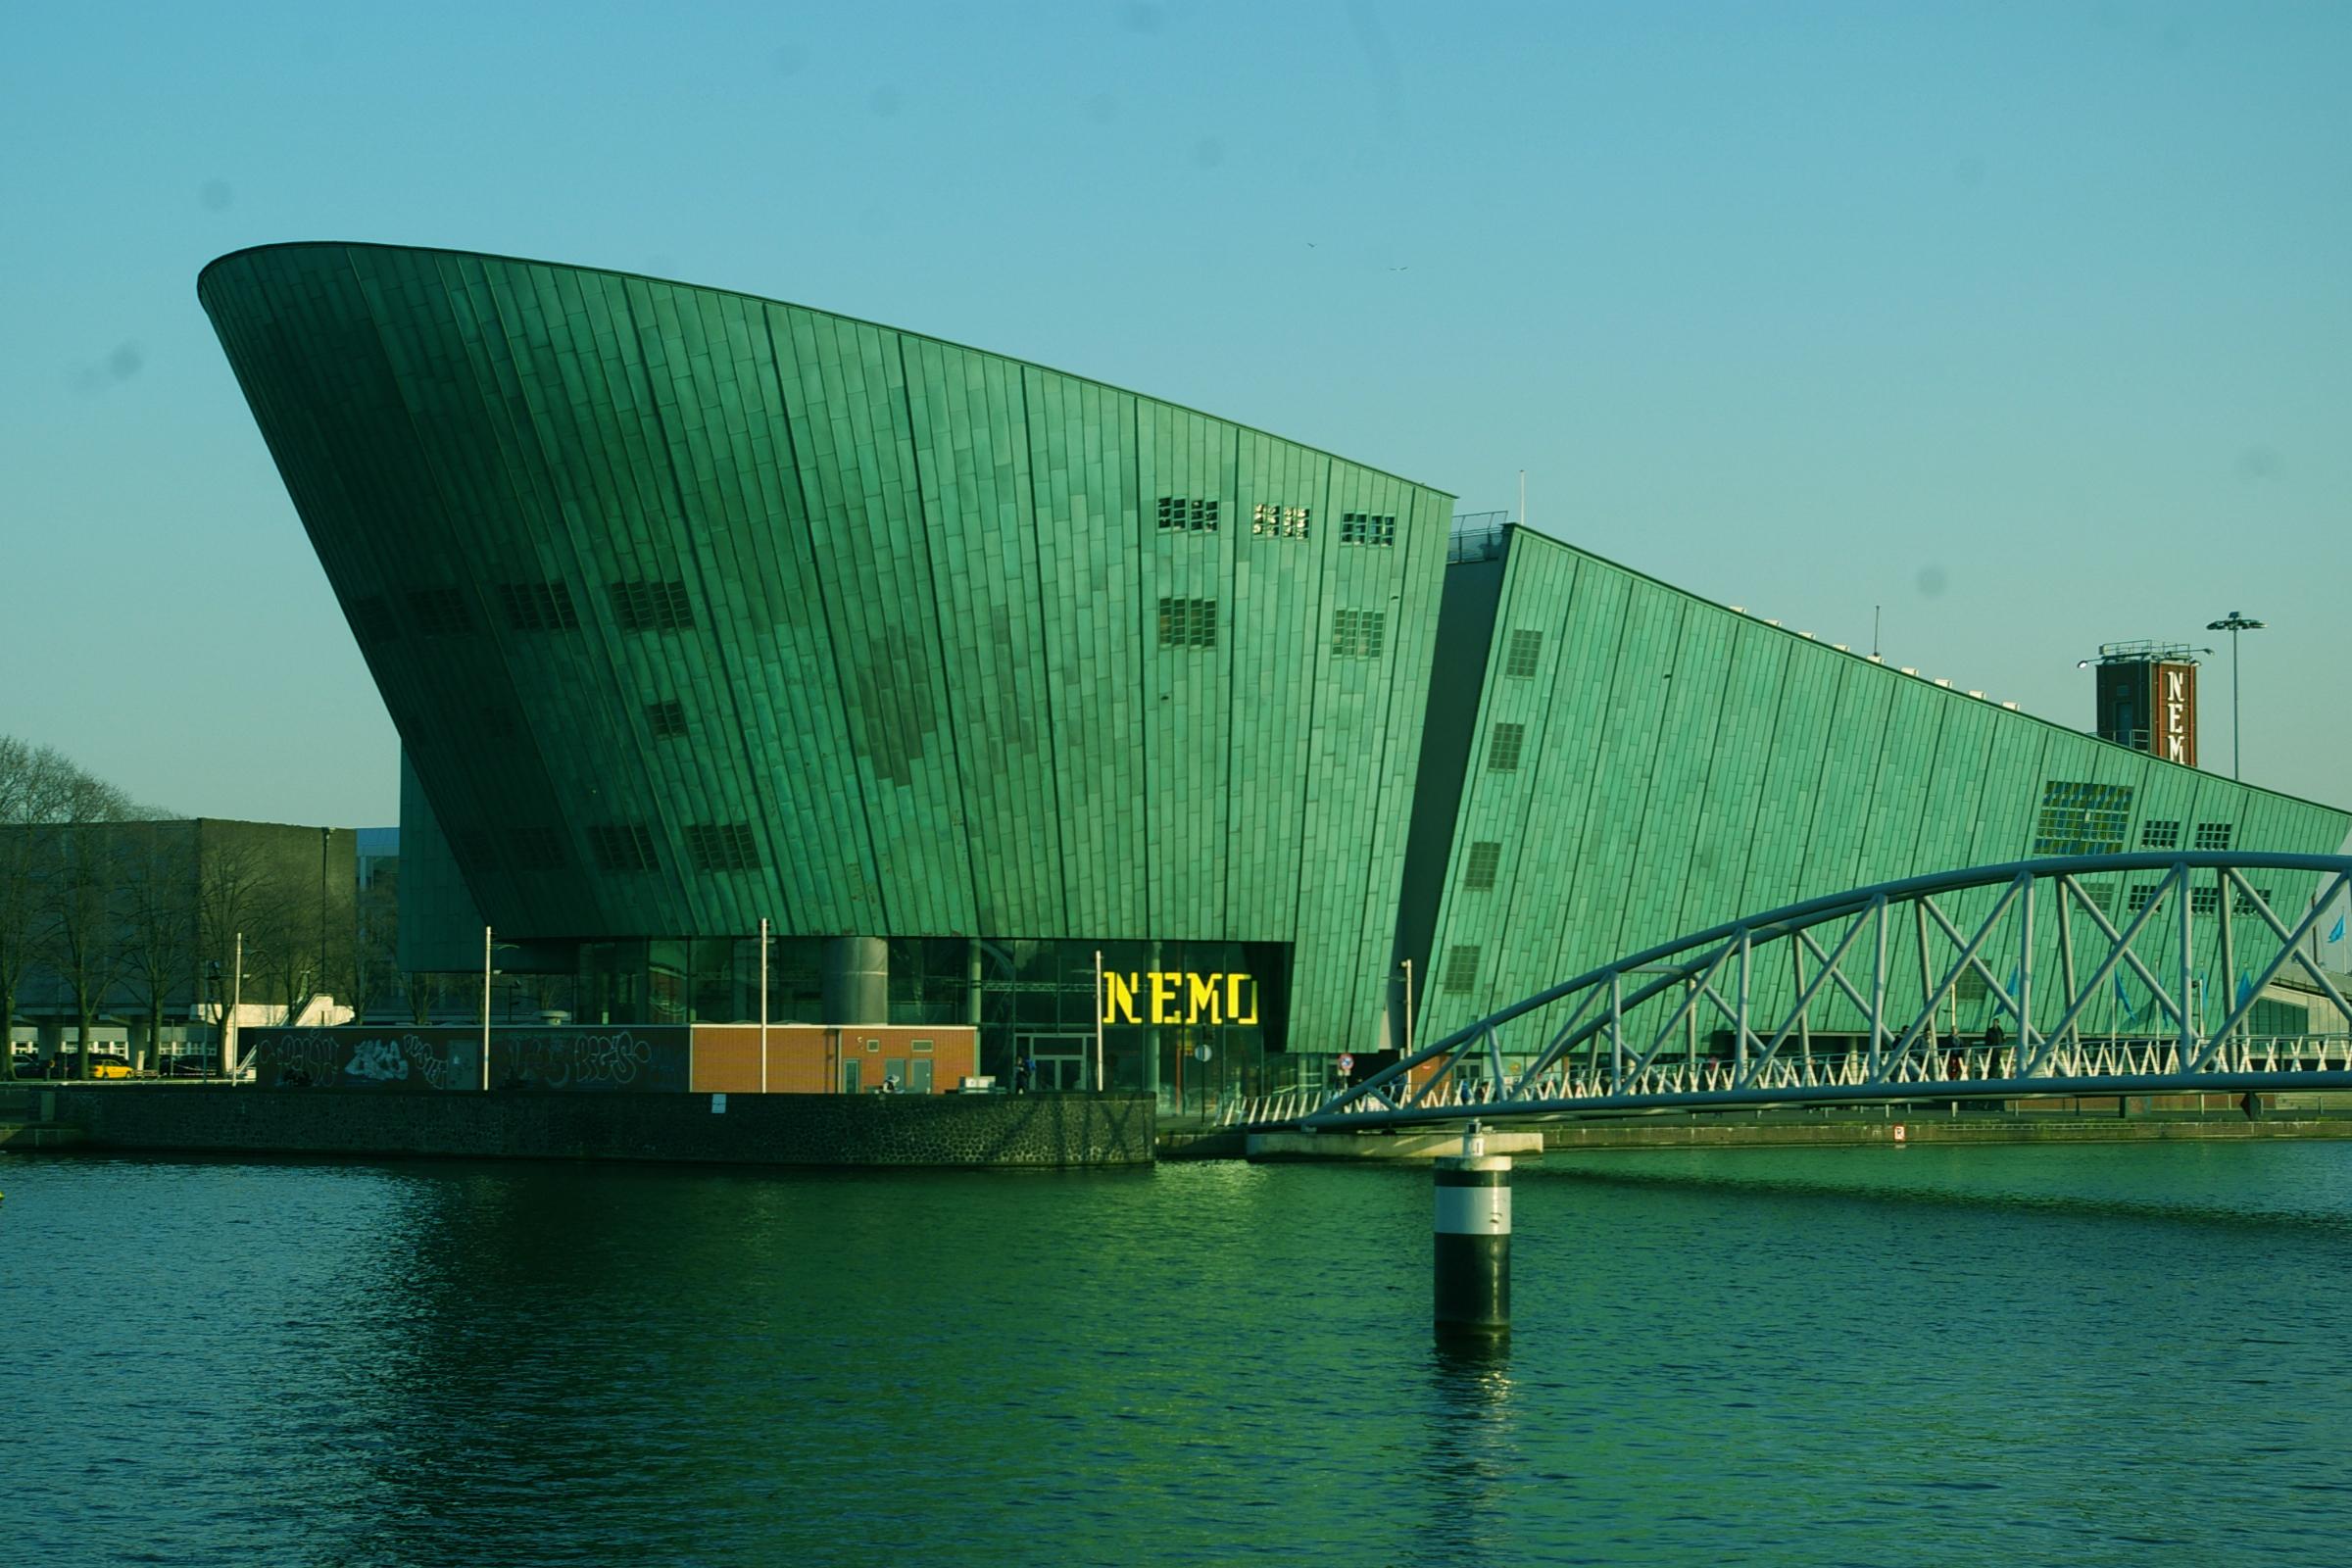 Cover image of this place NEMO science center